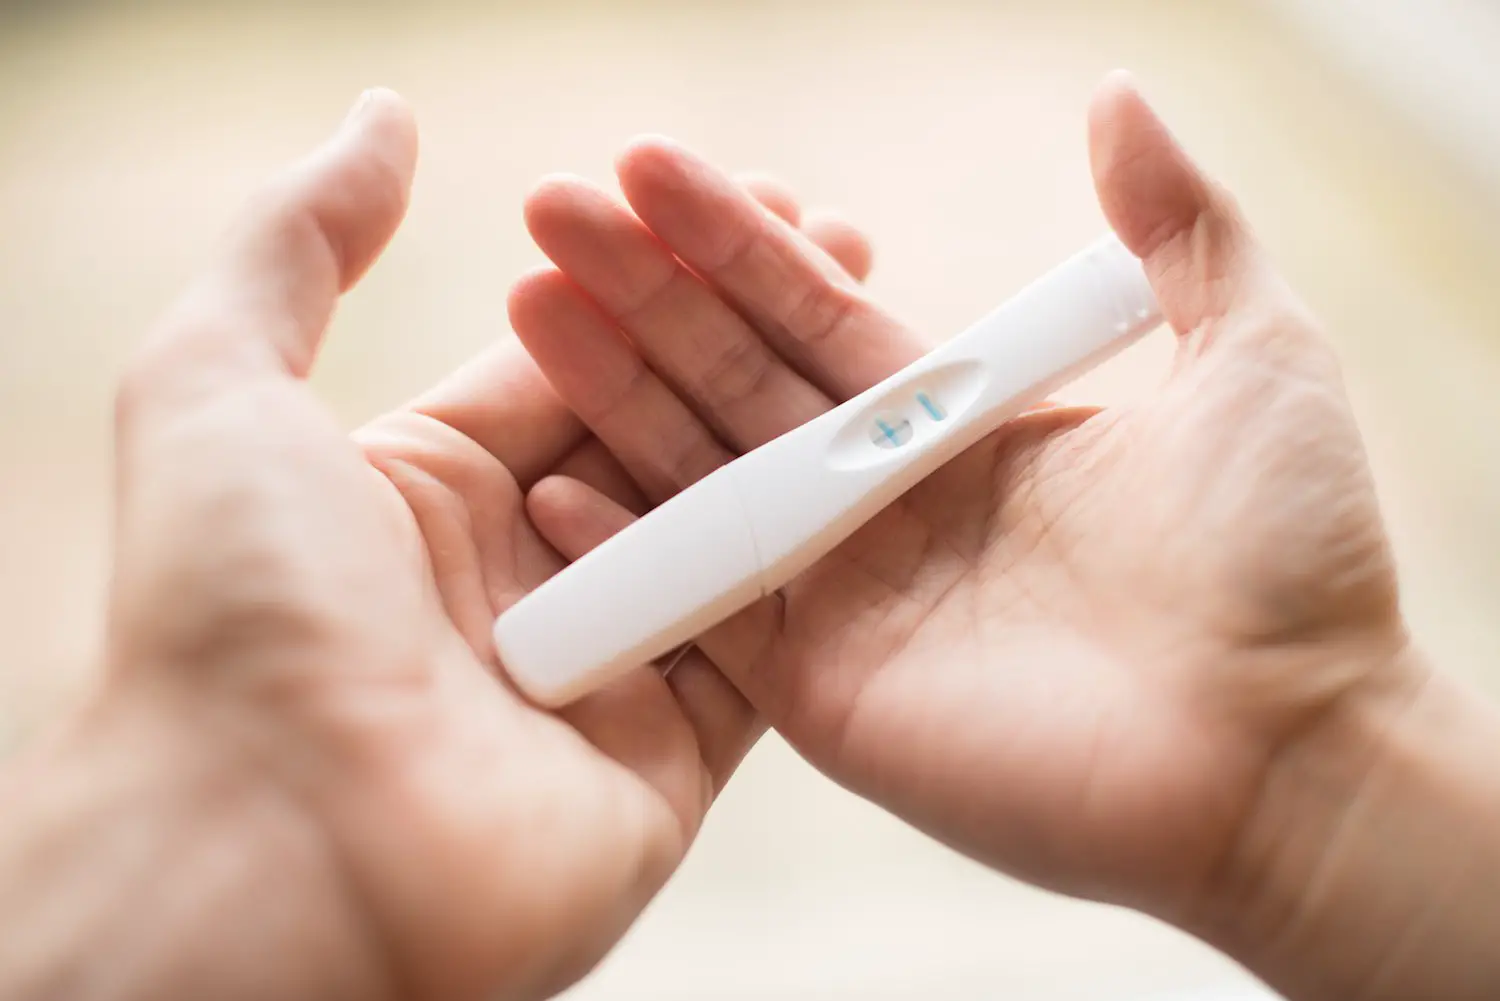 Can a Pregnancy Test Be Wrong?